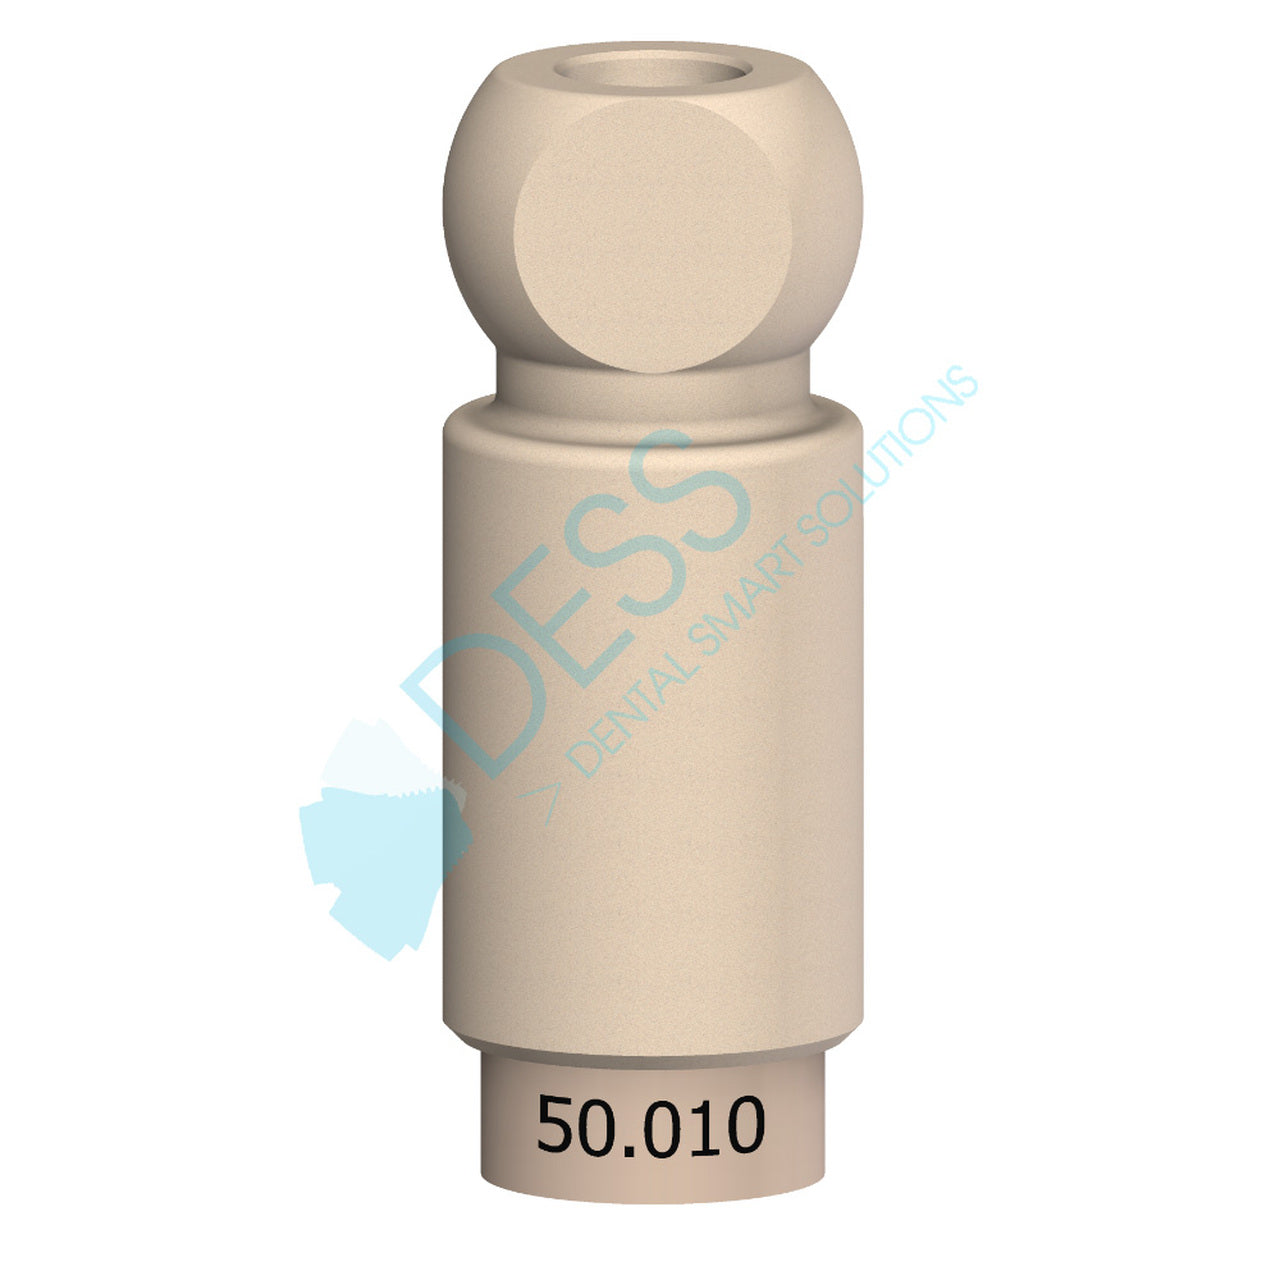 Scan abutment compatible with Straumann® Tissue level & synOcta®